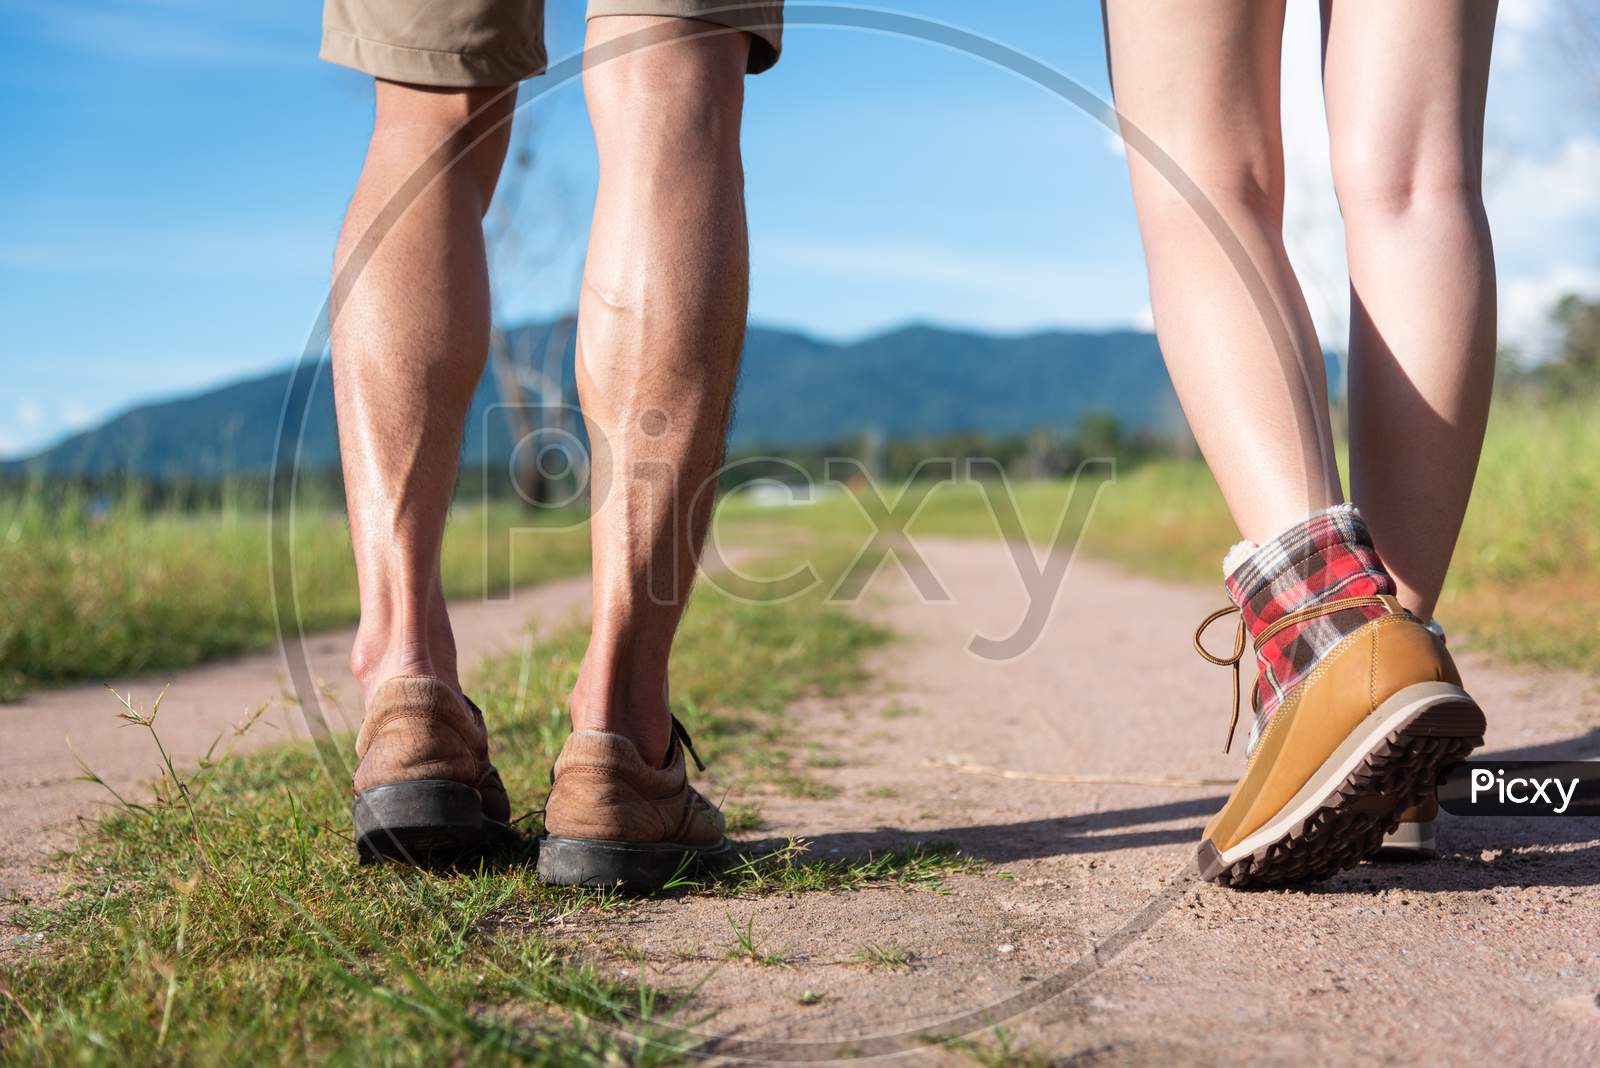 Close Up Of Lower Legs Of Two Travelers Walking Along Path In Nature. Hiking And Camping Concept. Backpacker An Tourist Concept. Outdoors Activity And Adventure Theme.